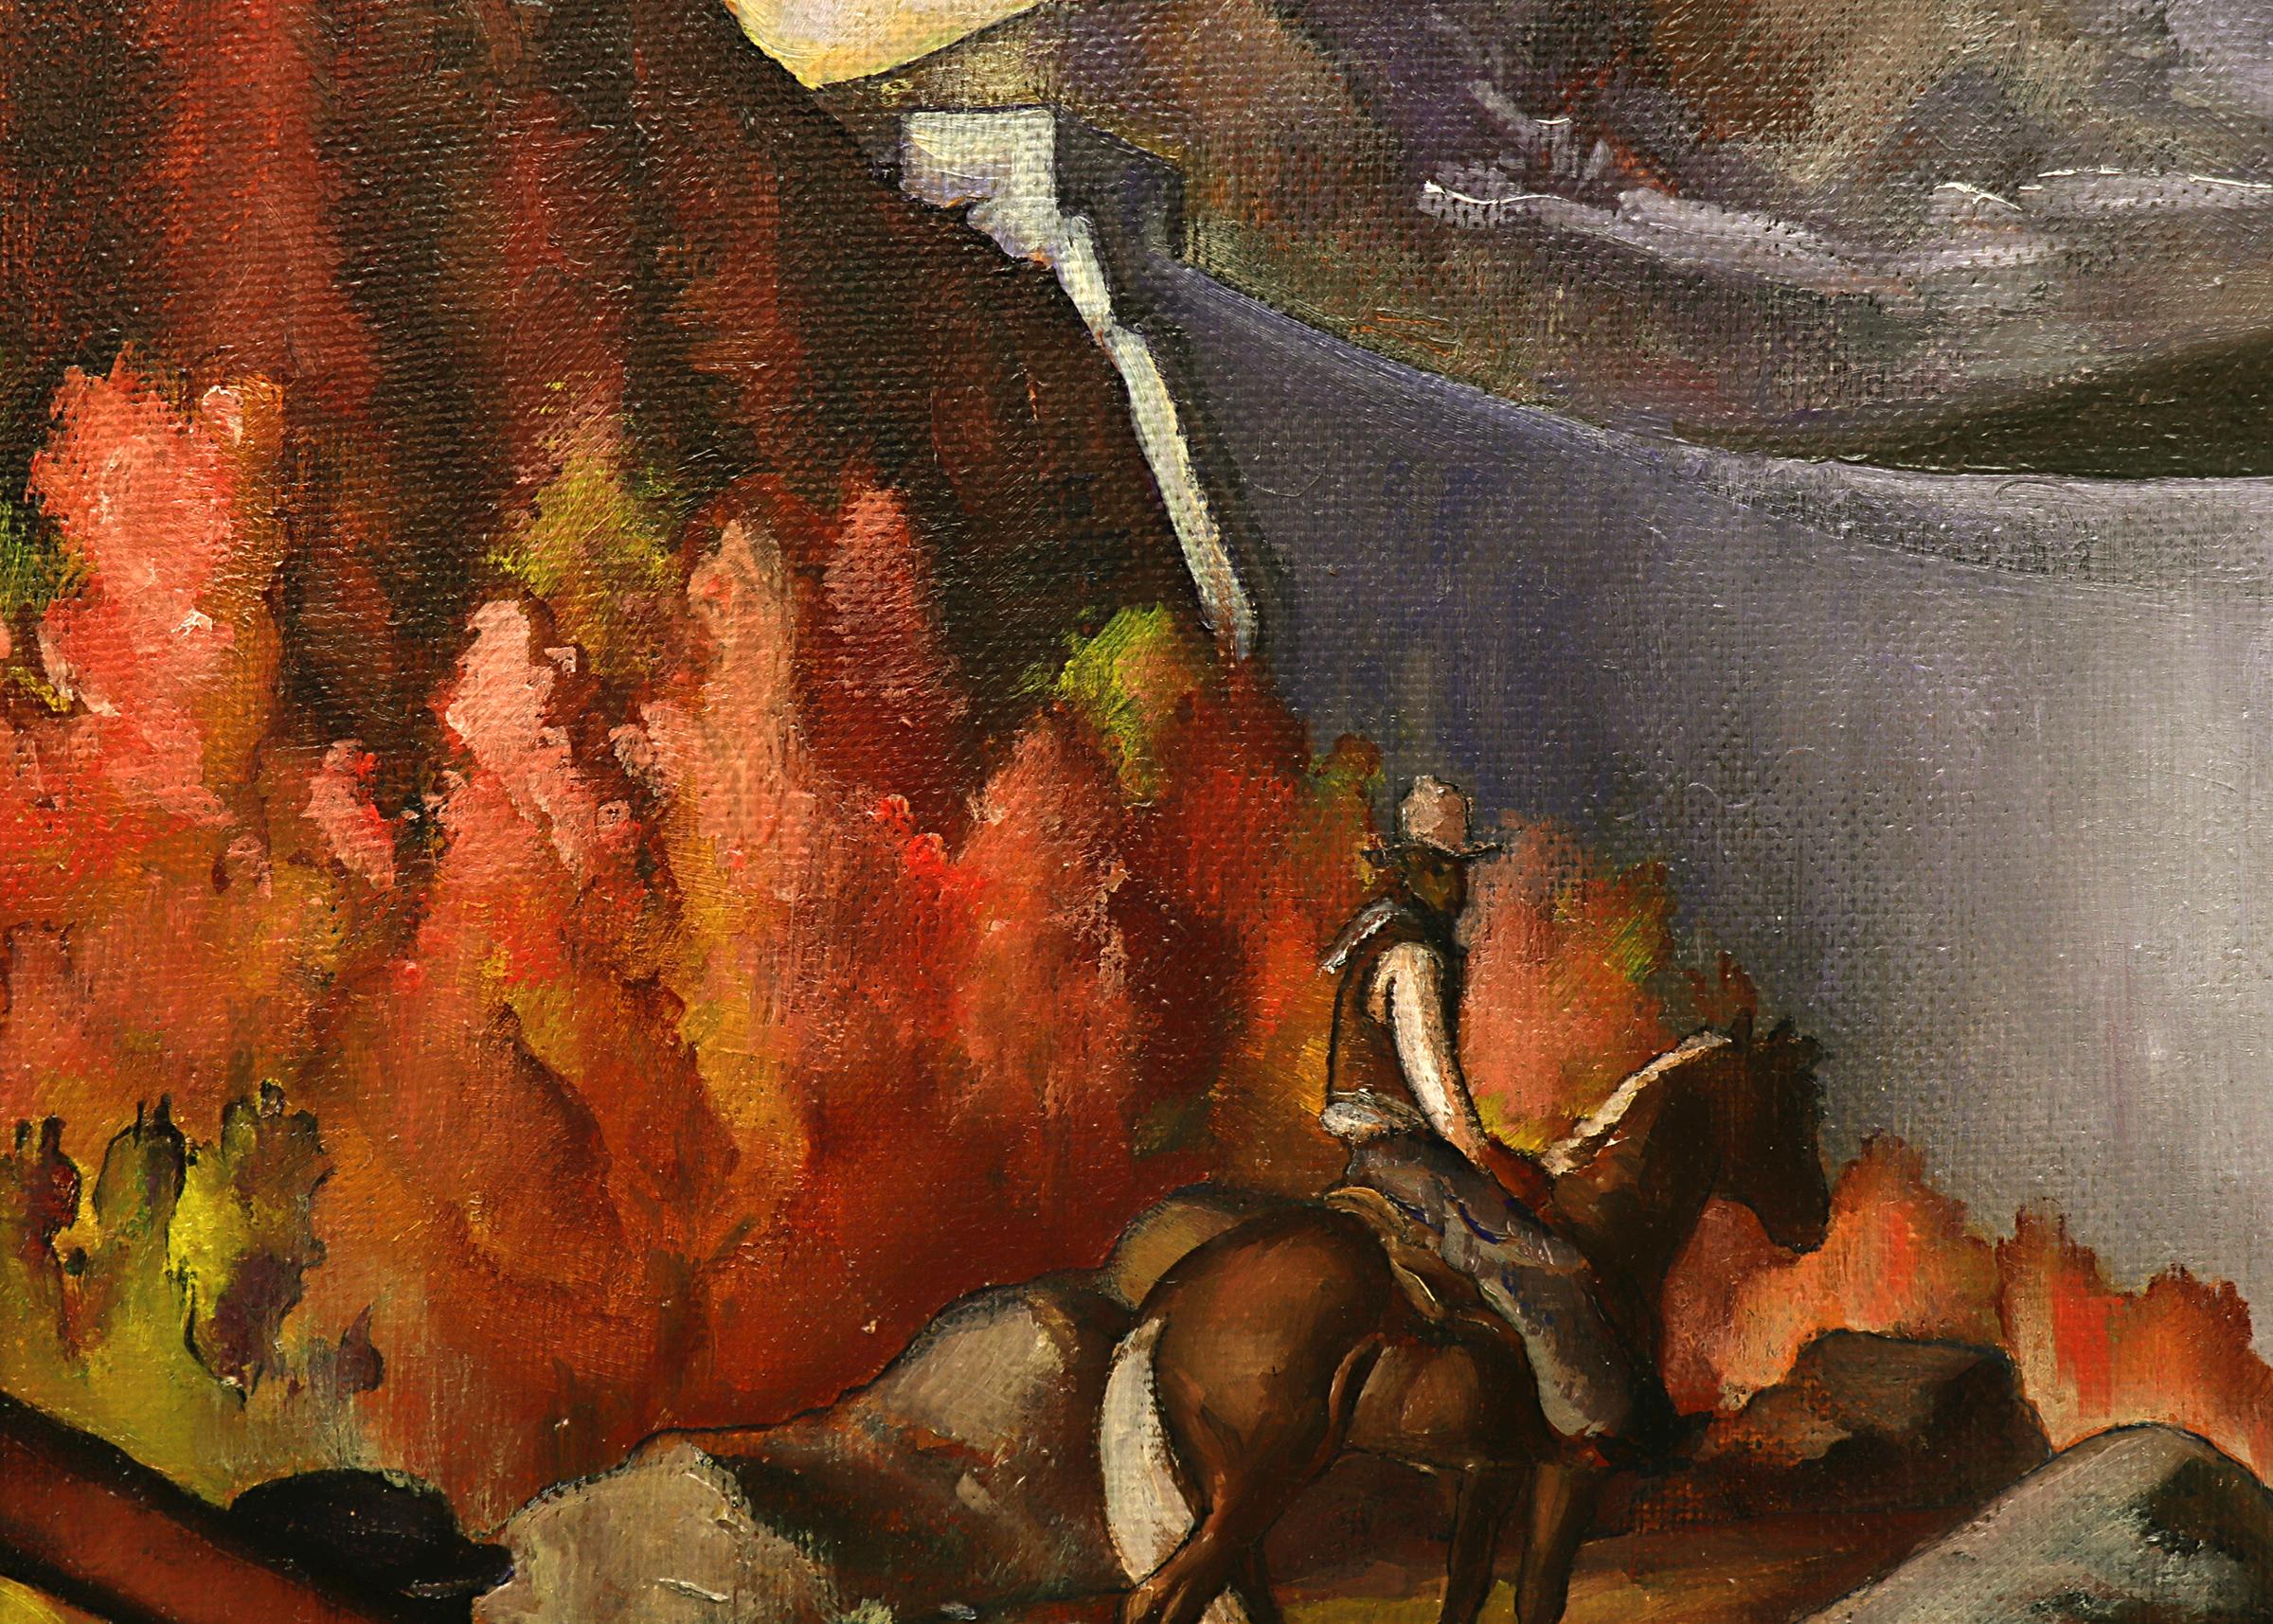 Dam Construction in the Mountains Colorado, 1930s WPA Era American Scene Painting 3